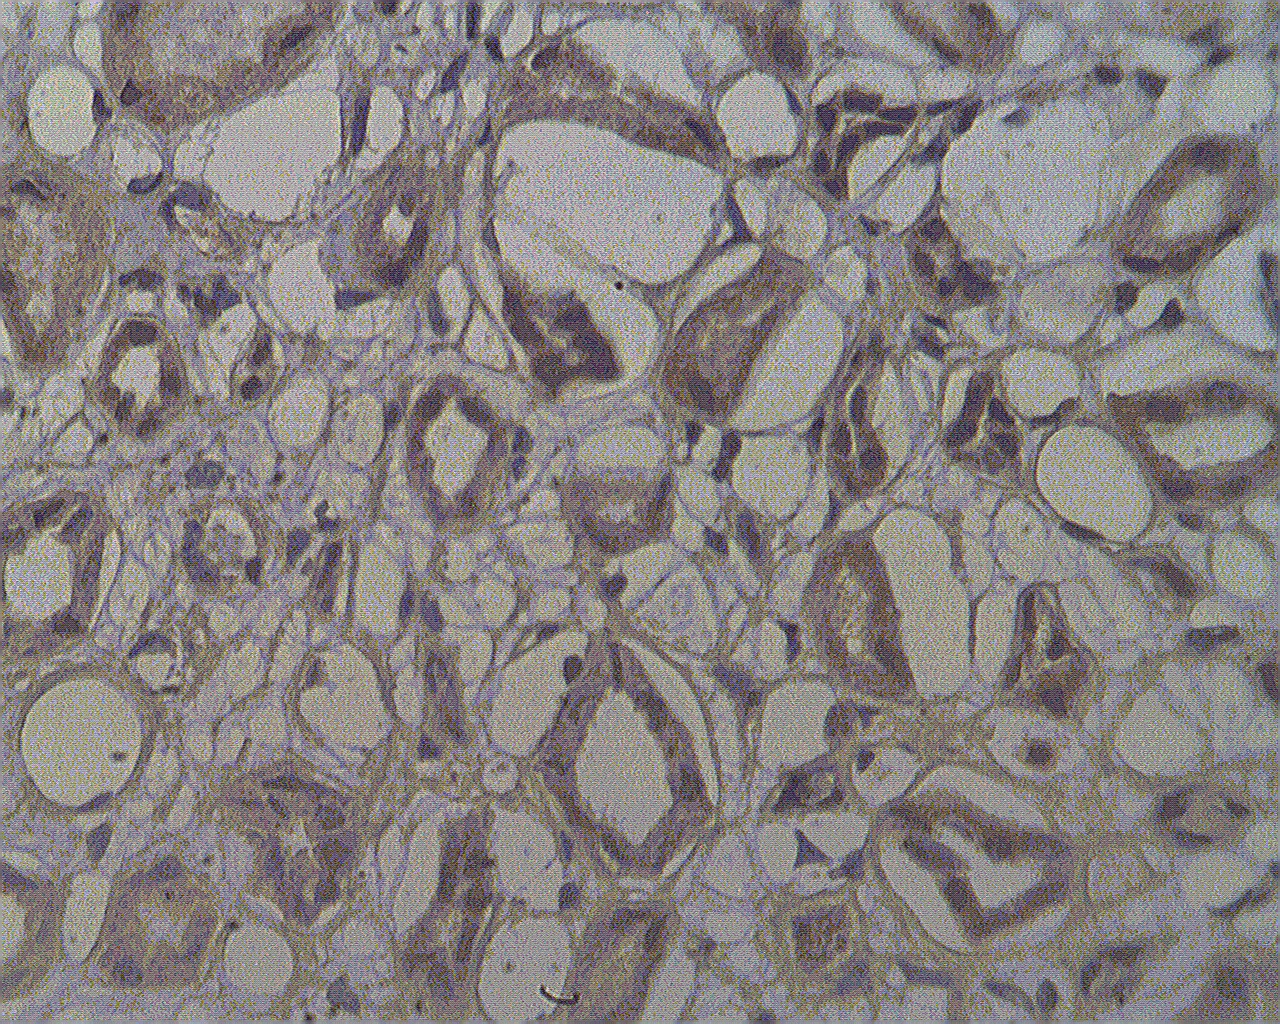 Staining on paraffin embedded normal human kidney sections using NOL4 antibody (Cat. No. X2417P) at 10 µg/ml.  Antigen retrieval used: 10 mM Na Citrate pH 6.0, 10 minutes pressure cooker method, developed with anti rabbit HRP and DAP substrate. Counterstained with methyl blue.